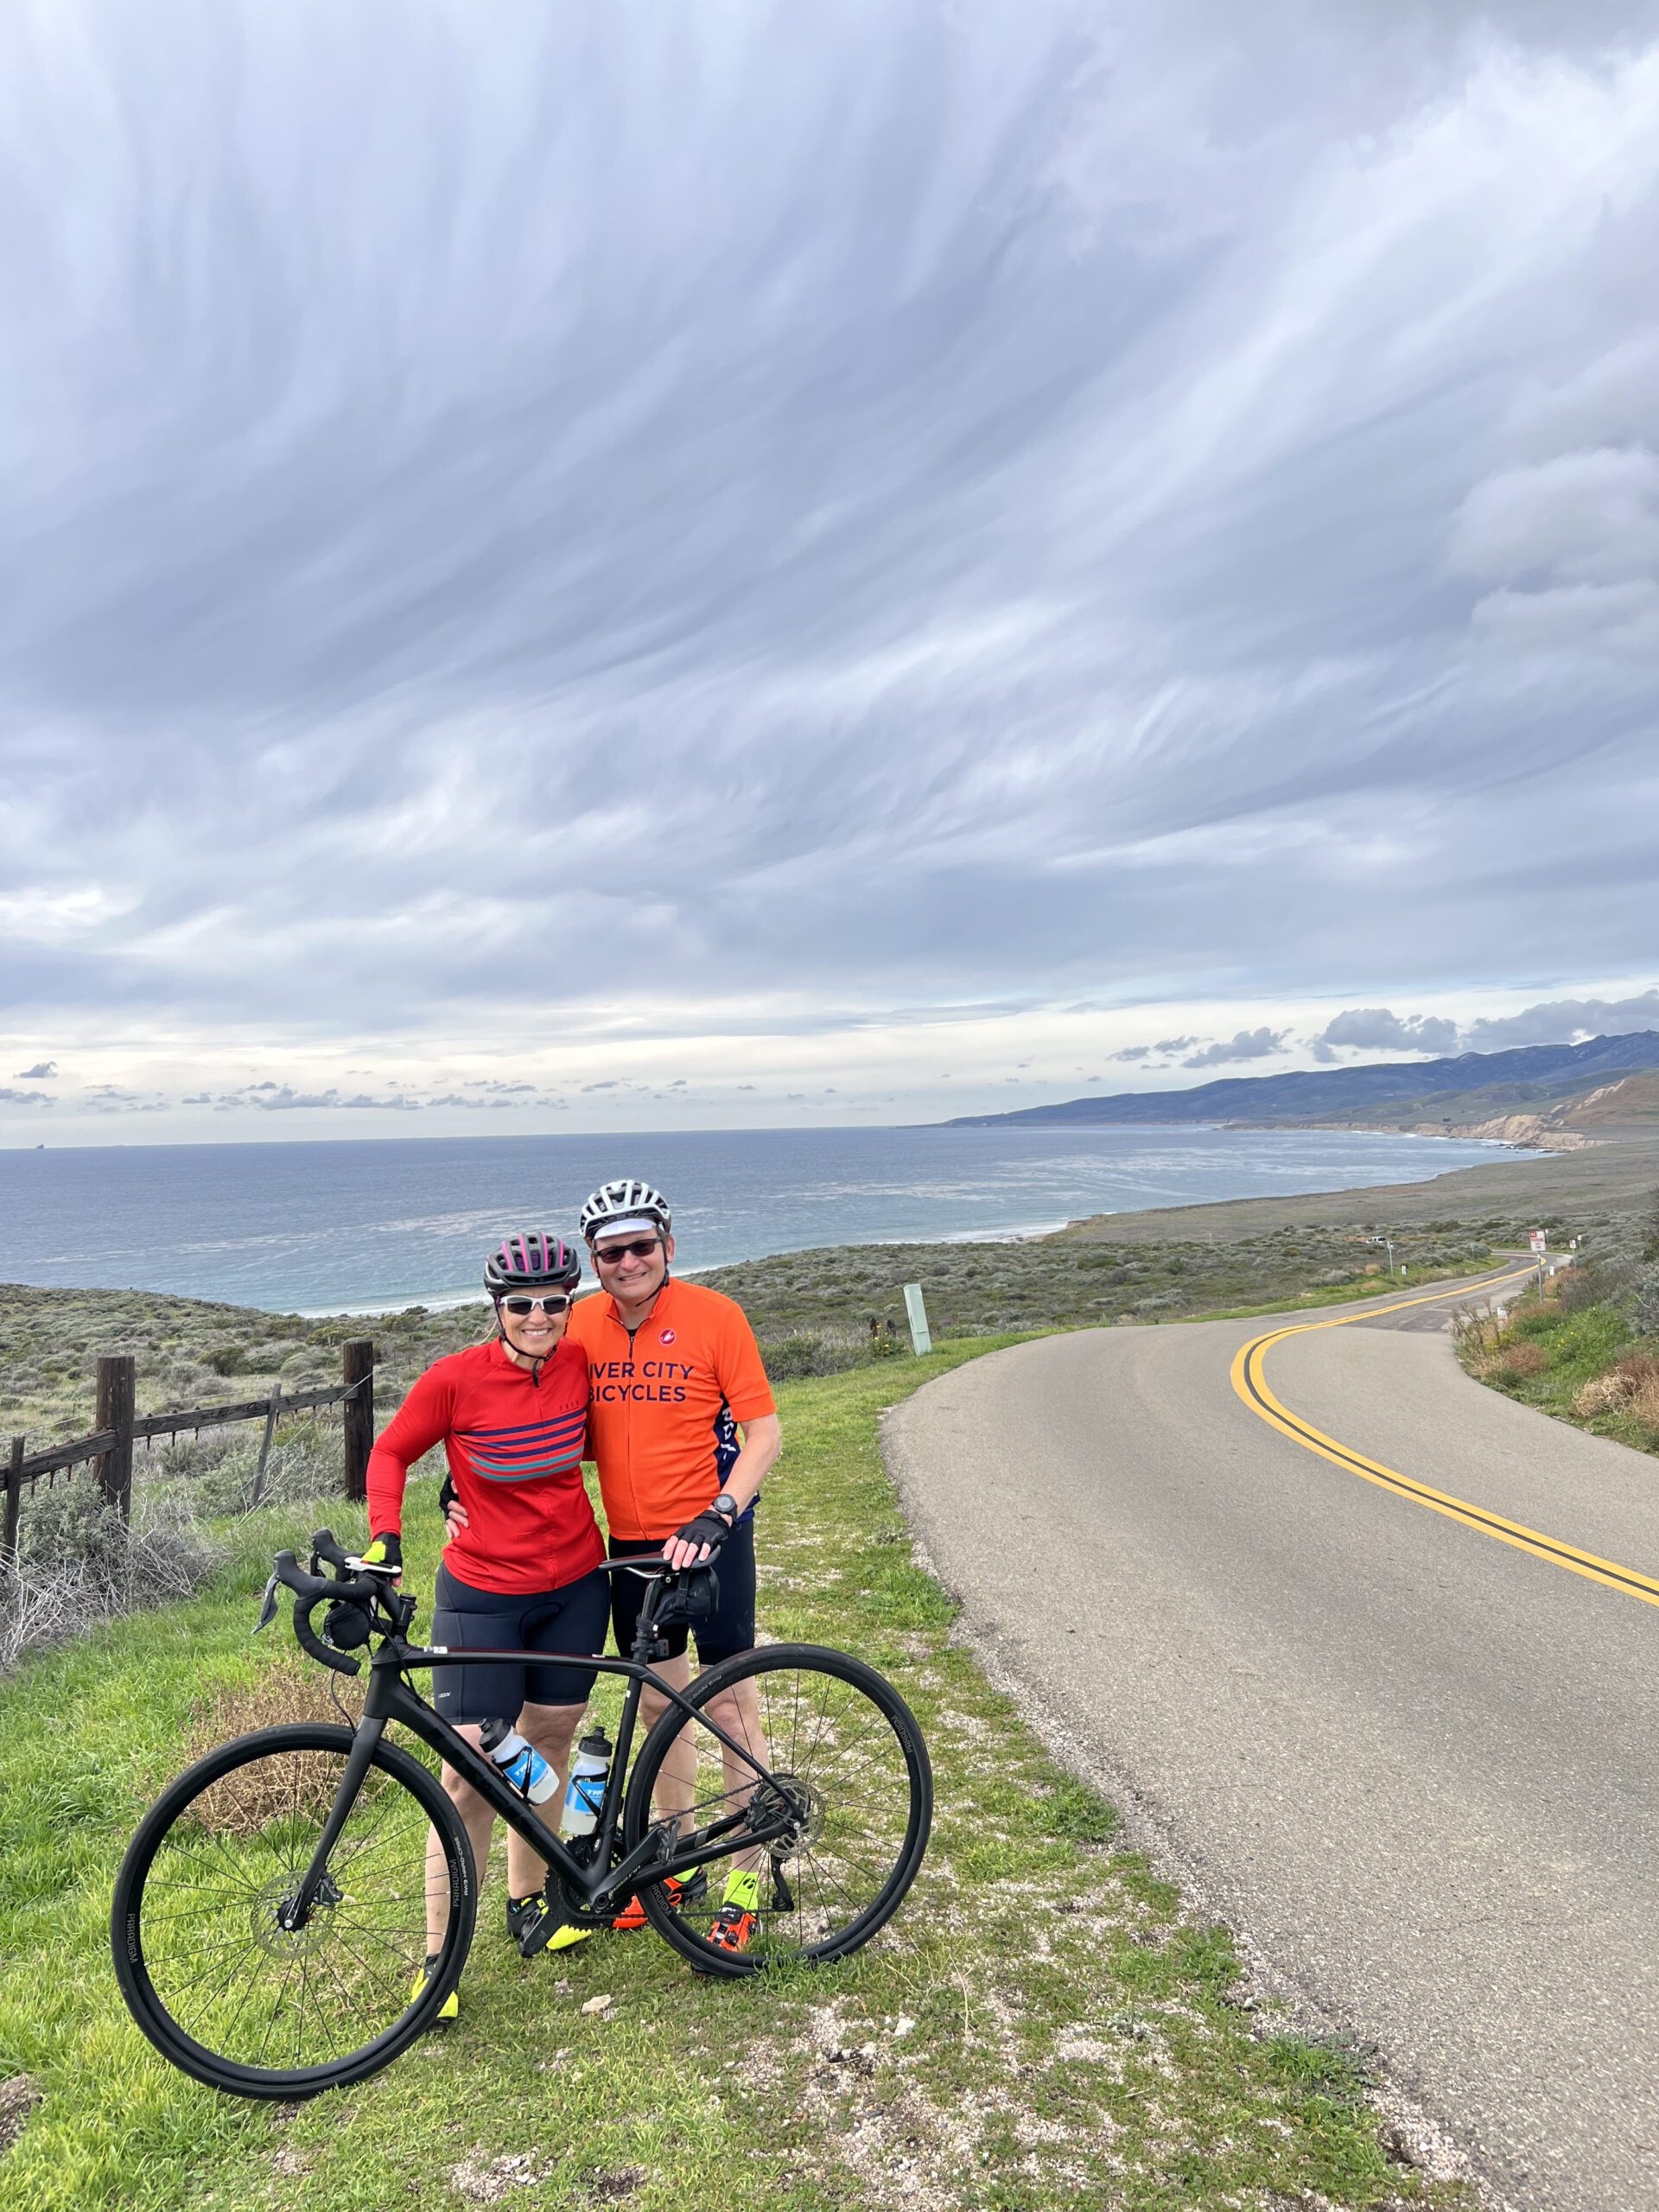 Two cyclists pose by the side of the road overlooking the ocean